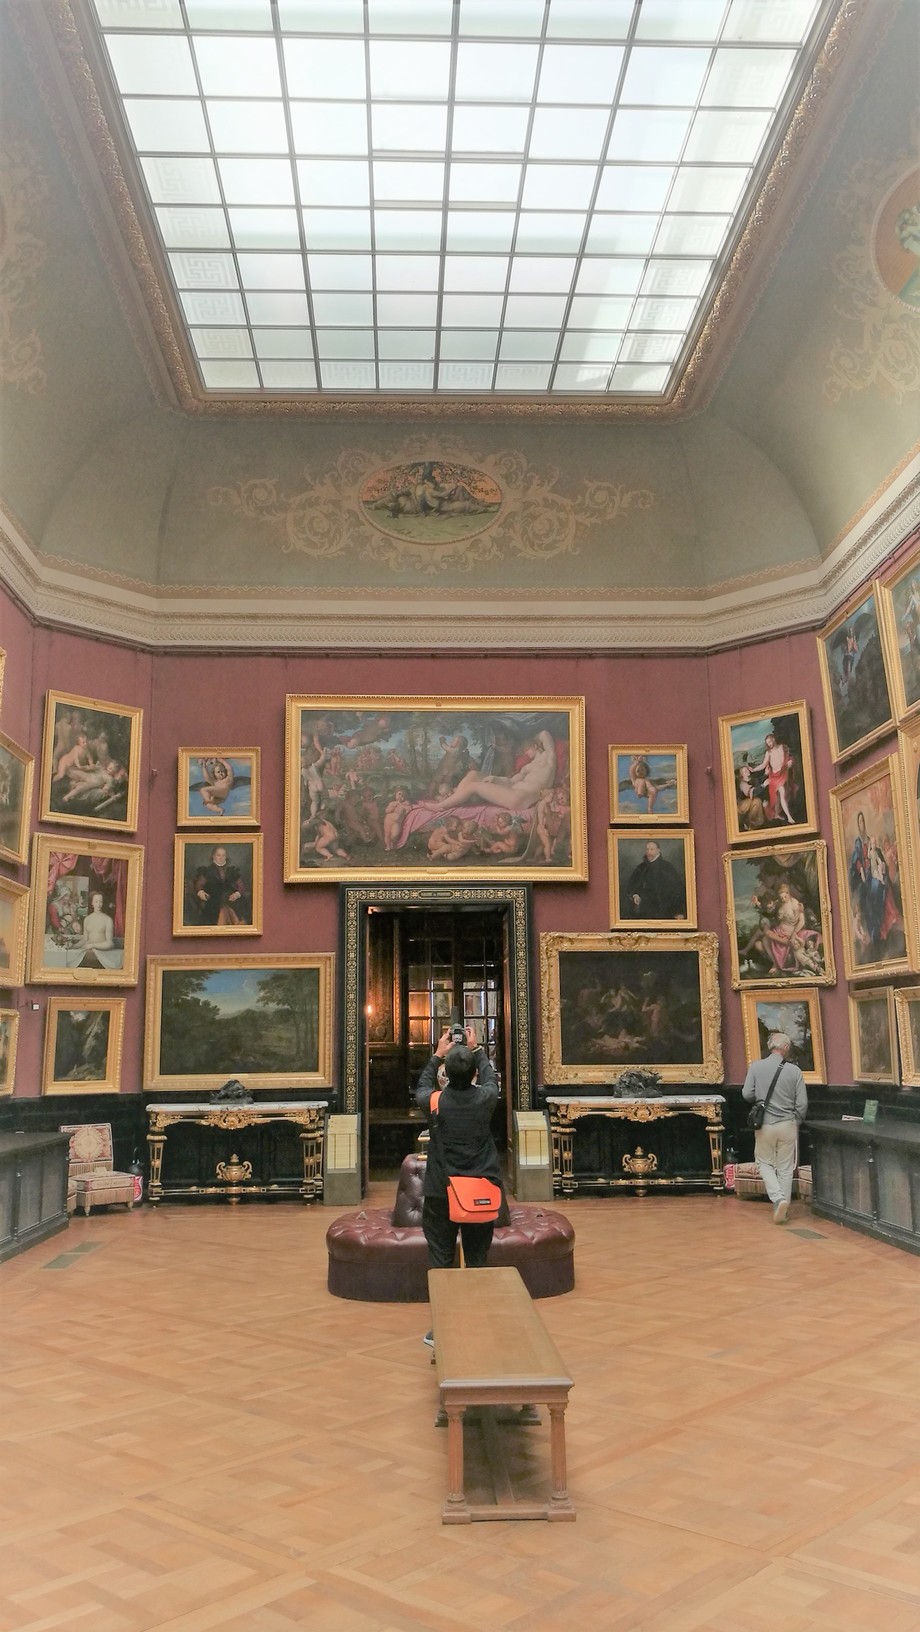 The Gallery of Painting